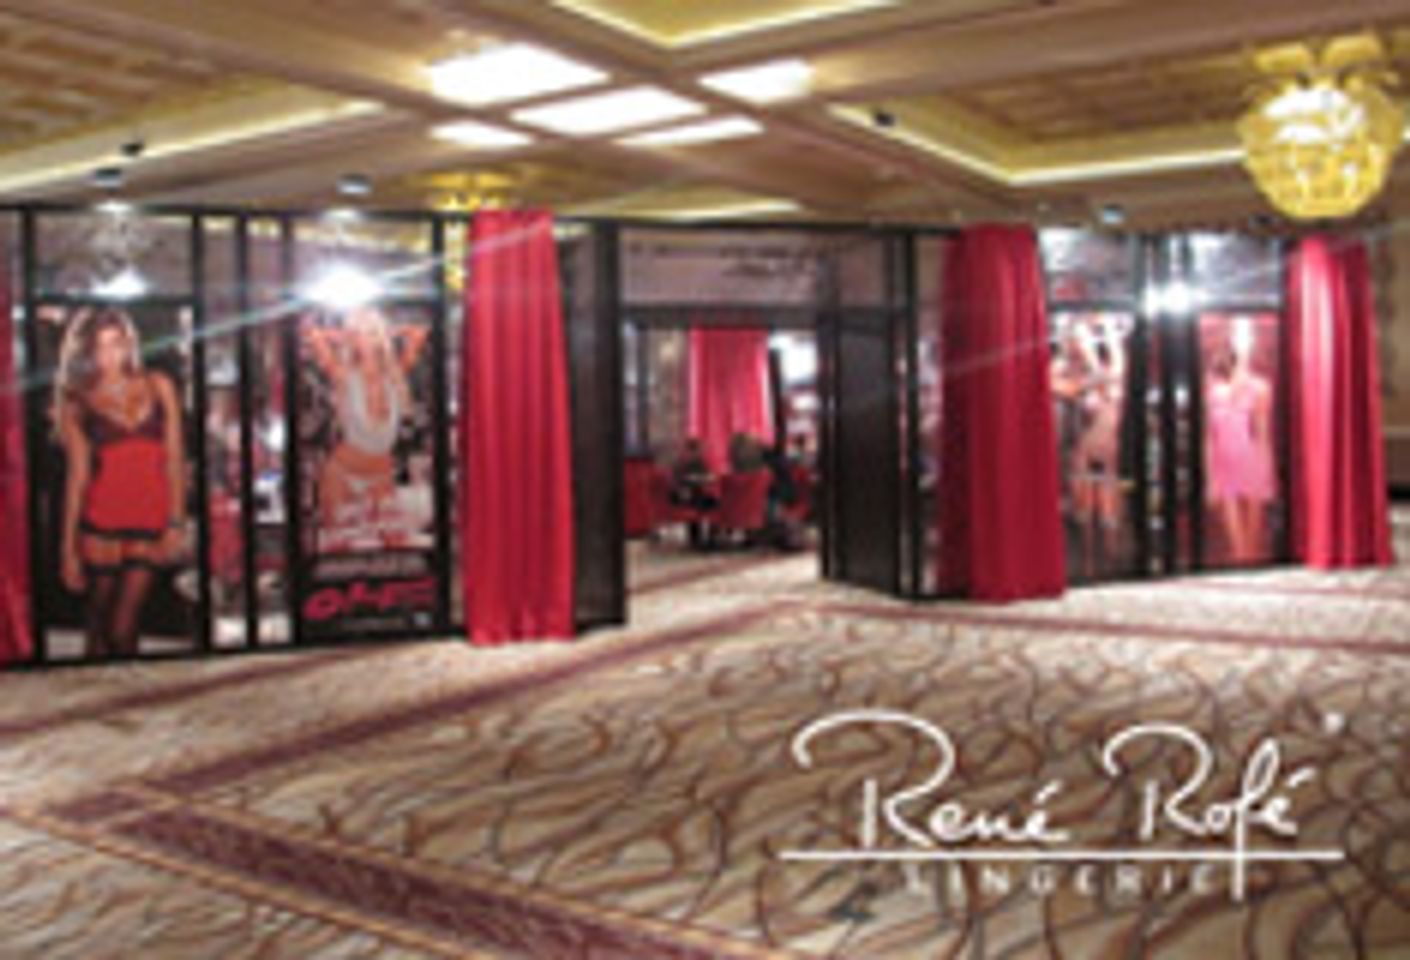 Rene Rofe Wows at ILS with New Booth, New Products